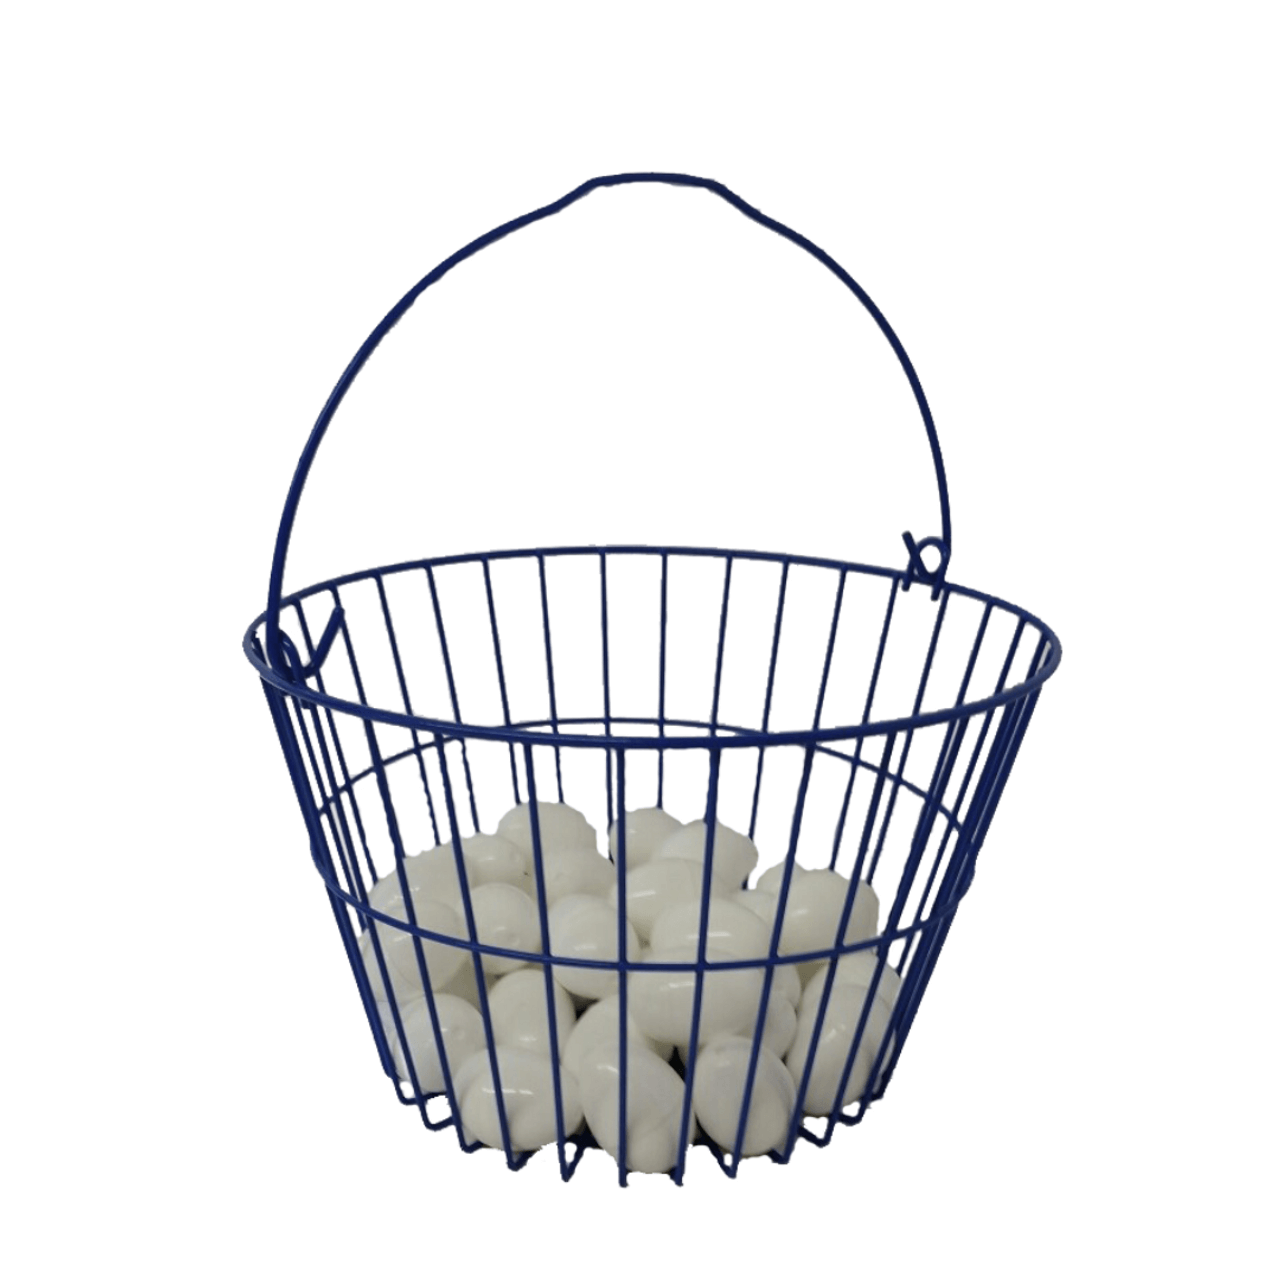 Large Plastic Blue Storage Baskets with Handles, 2-Count